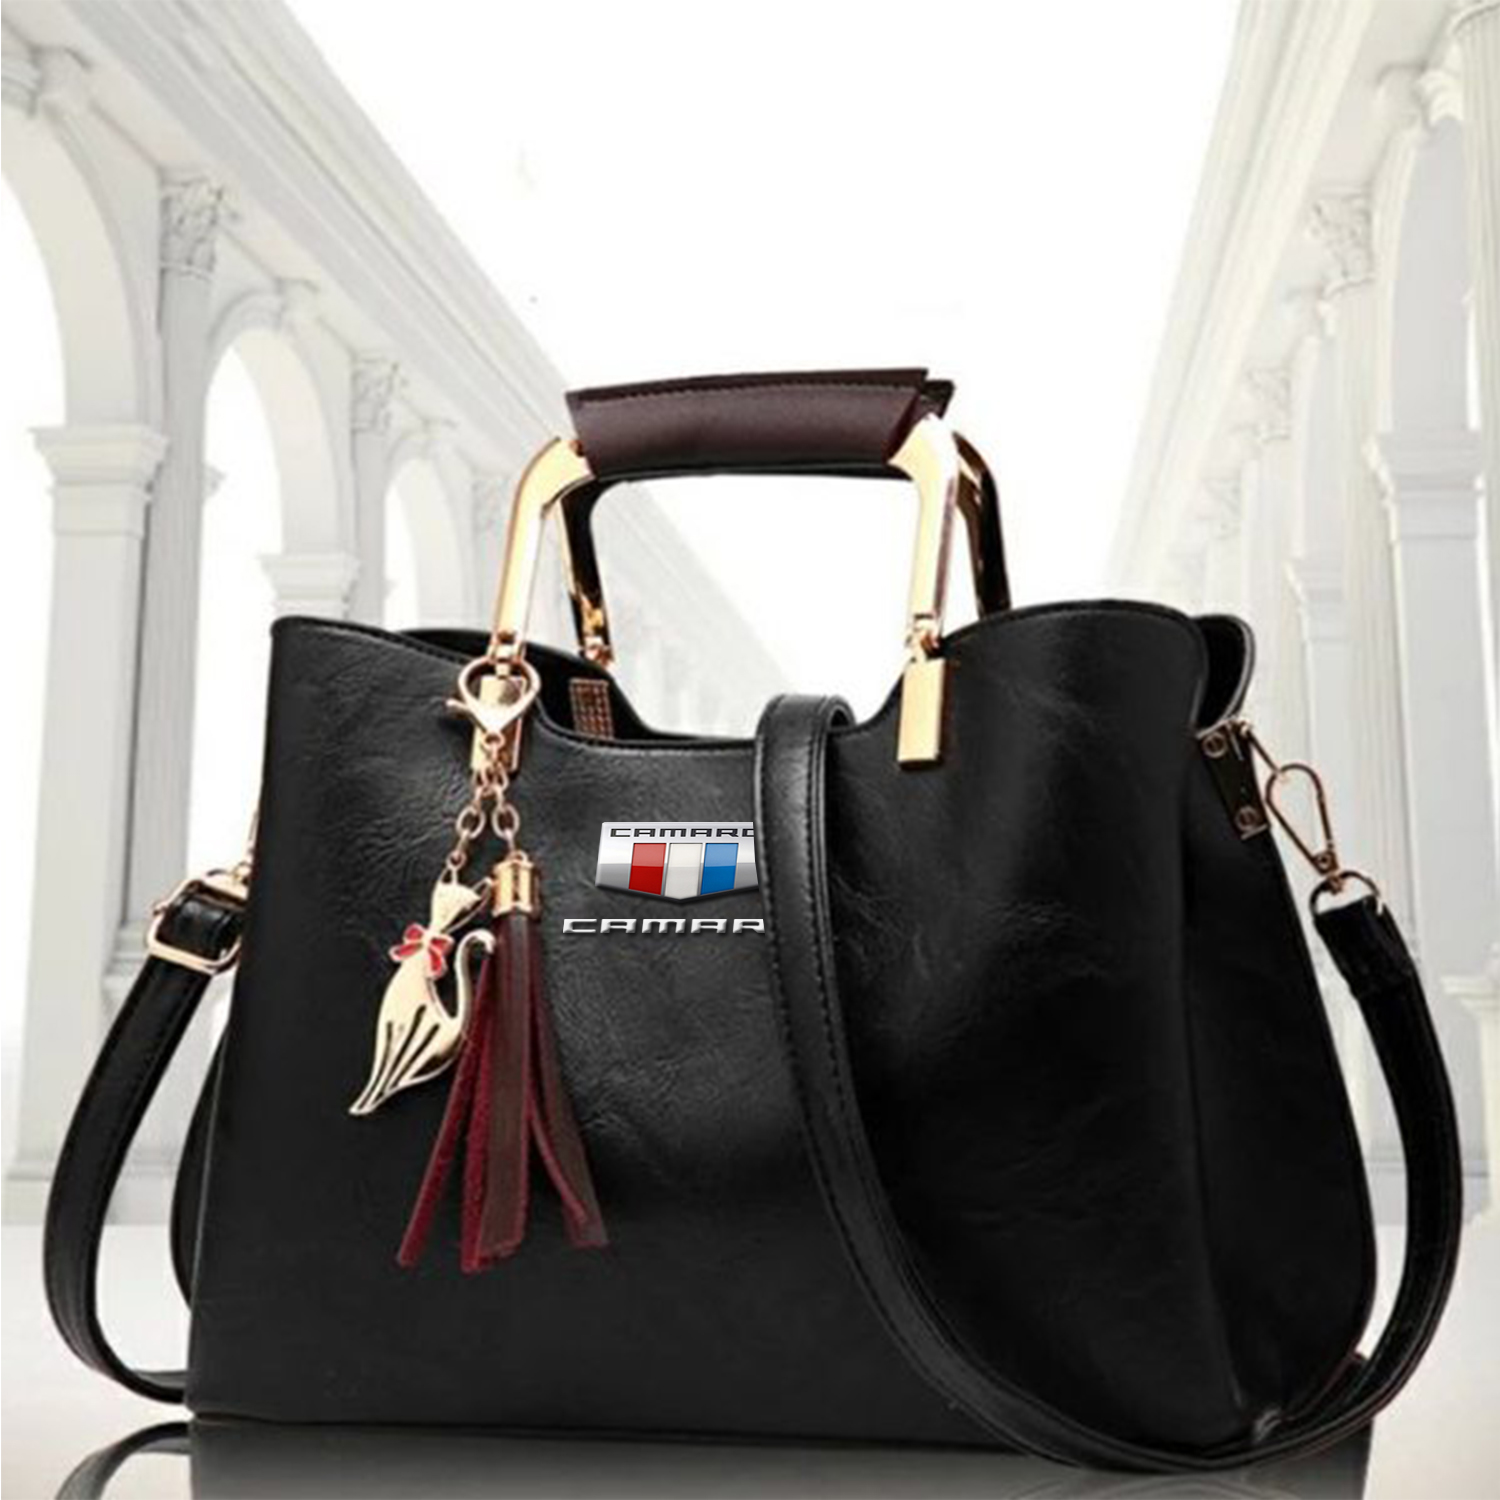 Buy Money iin Handbags for Women/Ladies Purses Stylish Genuine Leather  Branded Best for Official Every Day Formal Used With Long Cross Body Handel  at Amazon.in